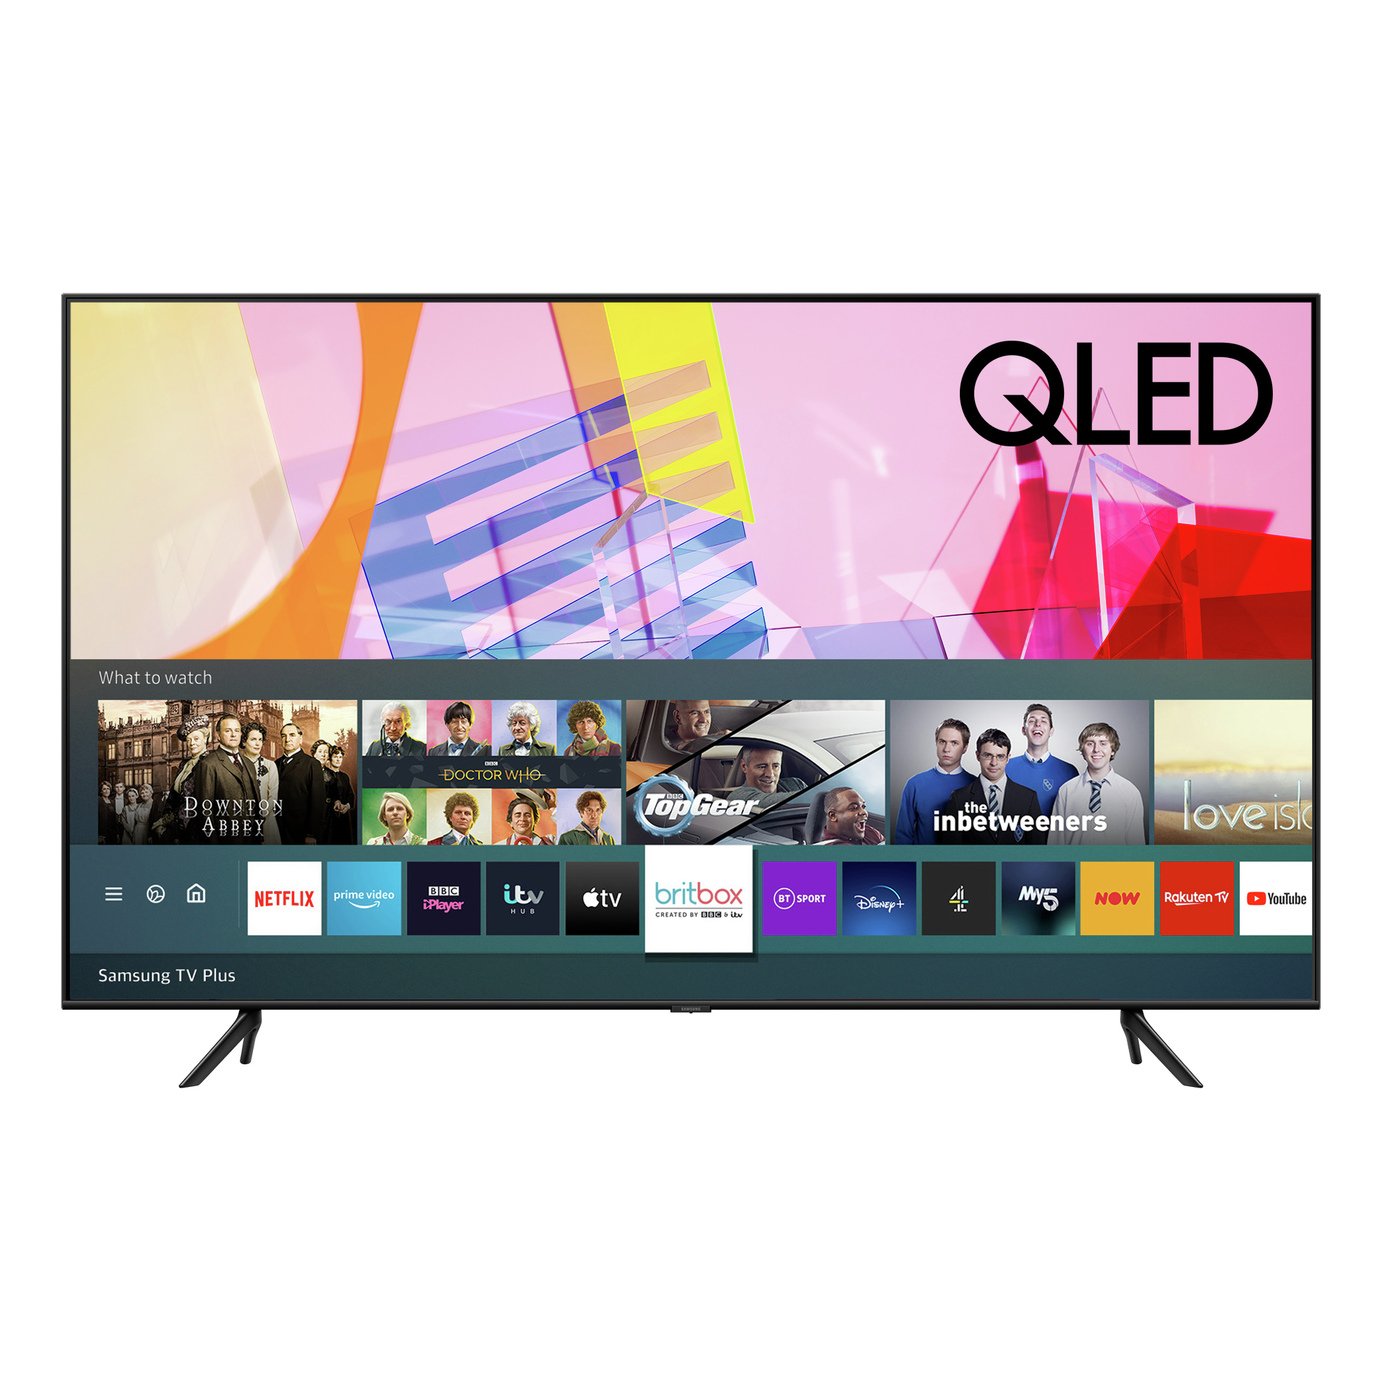 Samsung 55 Inch QE55Q60T Ultra HD QLED TV with HDR Review